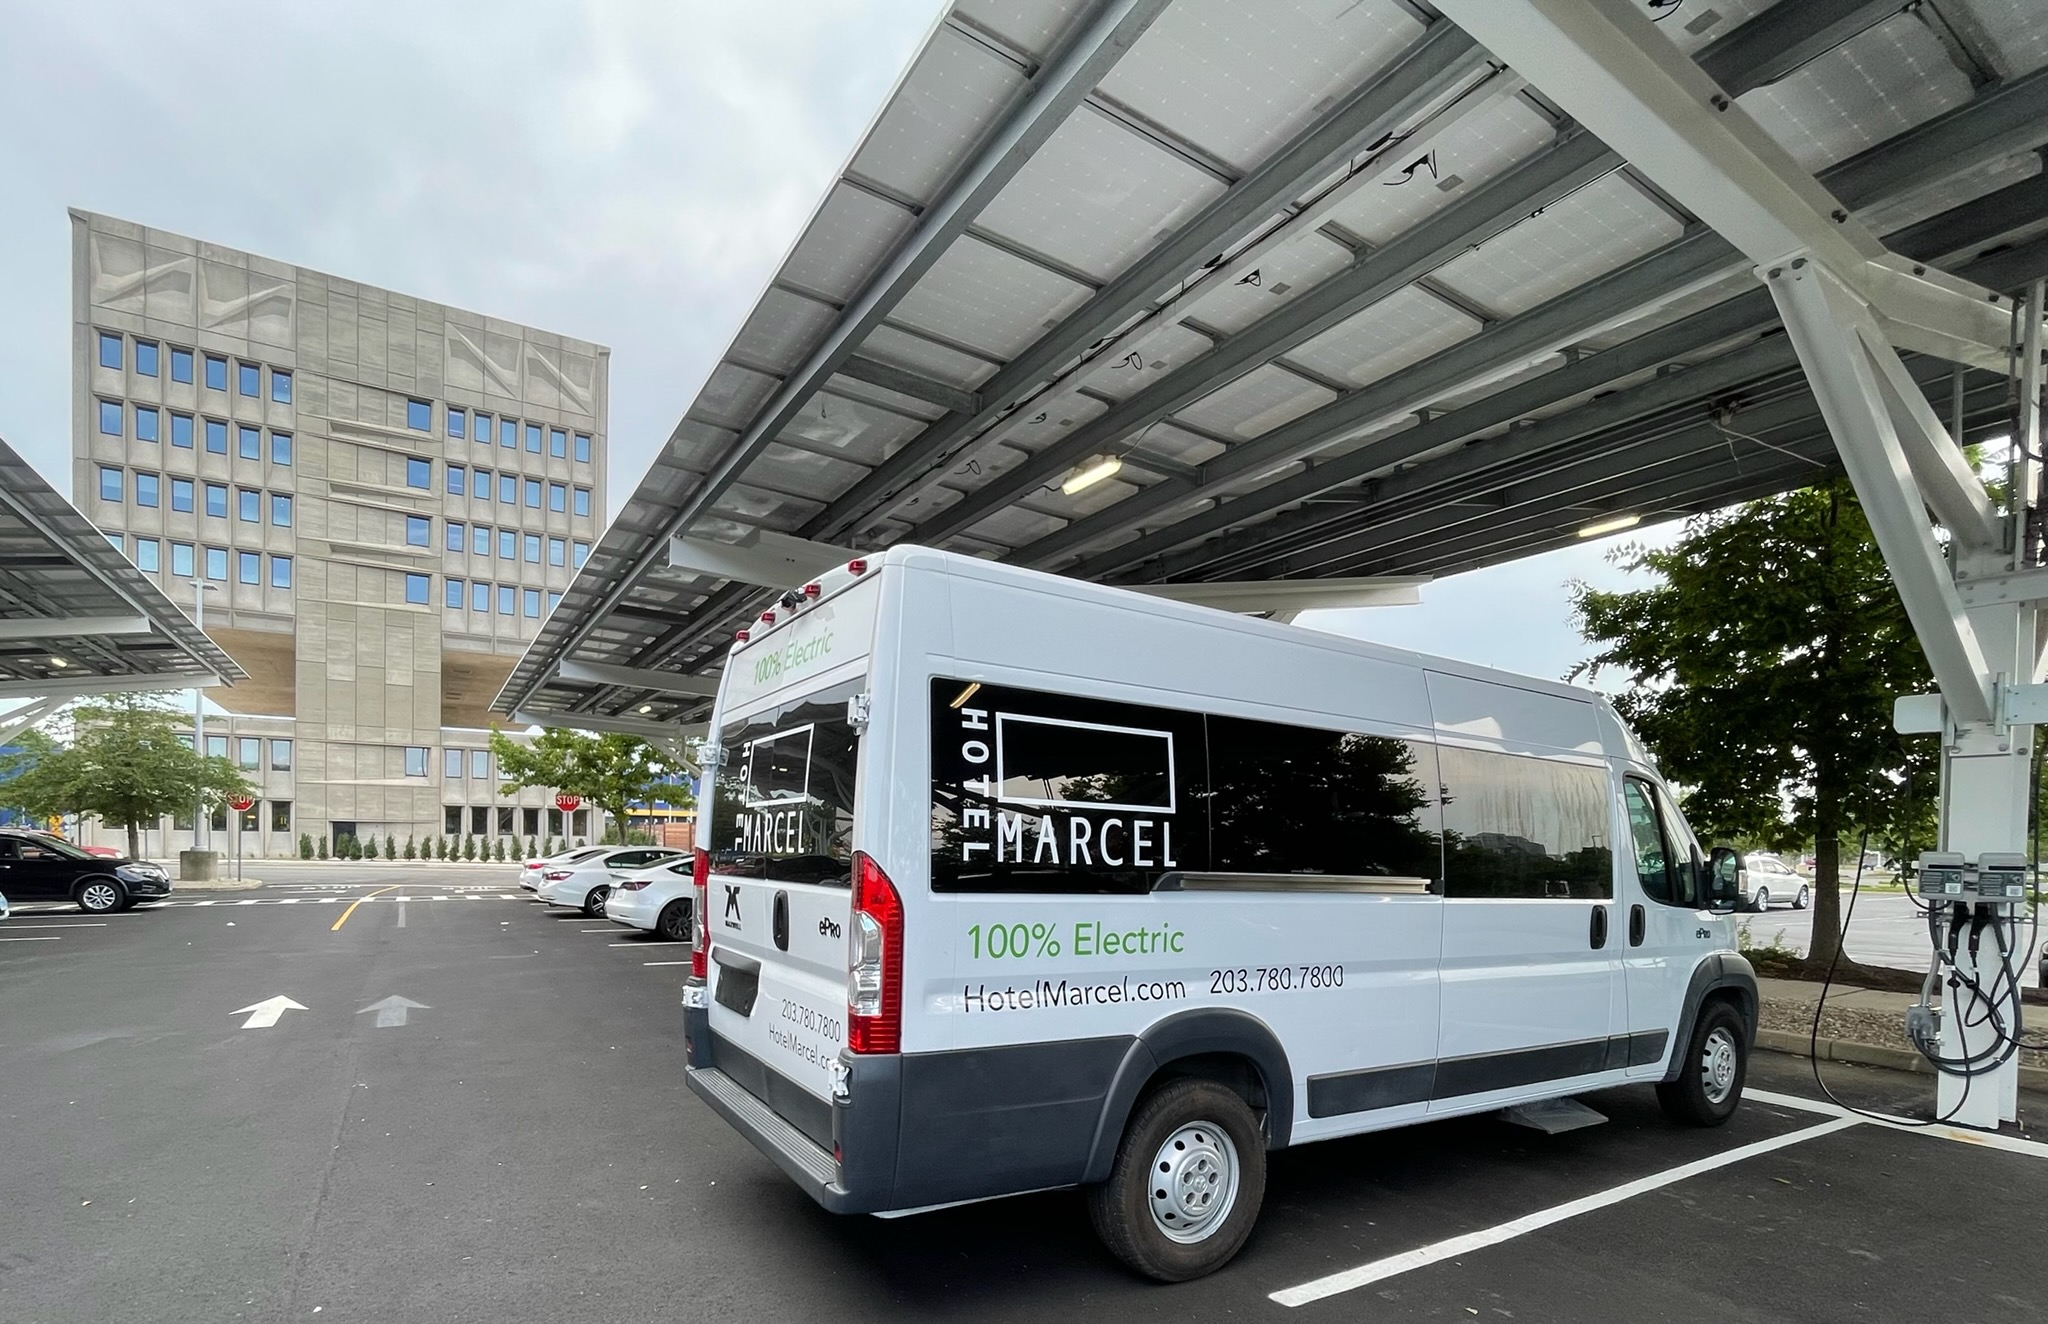 Hotel Marcel New Haven and electric shuttle van with solar canopy and level 2 EV chargers.